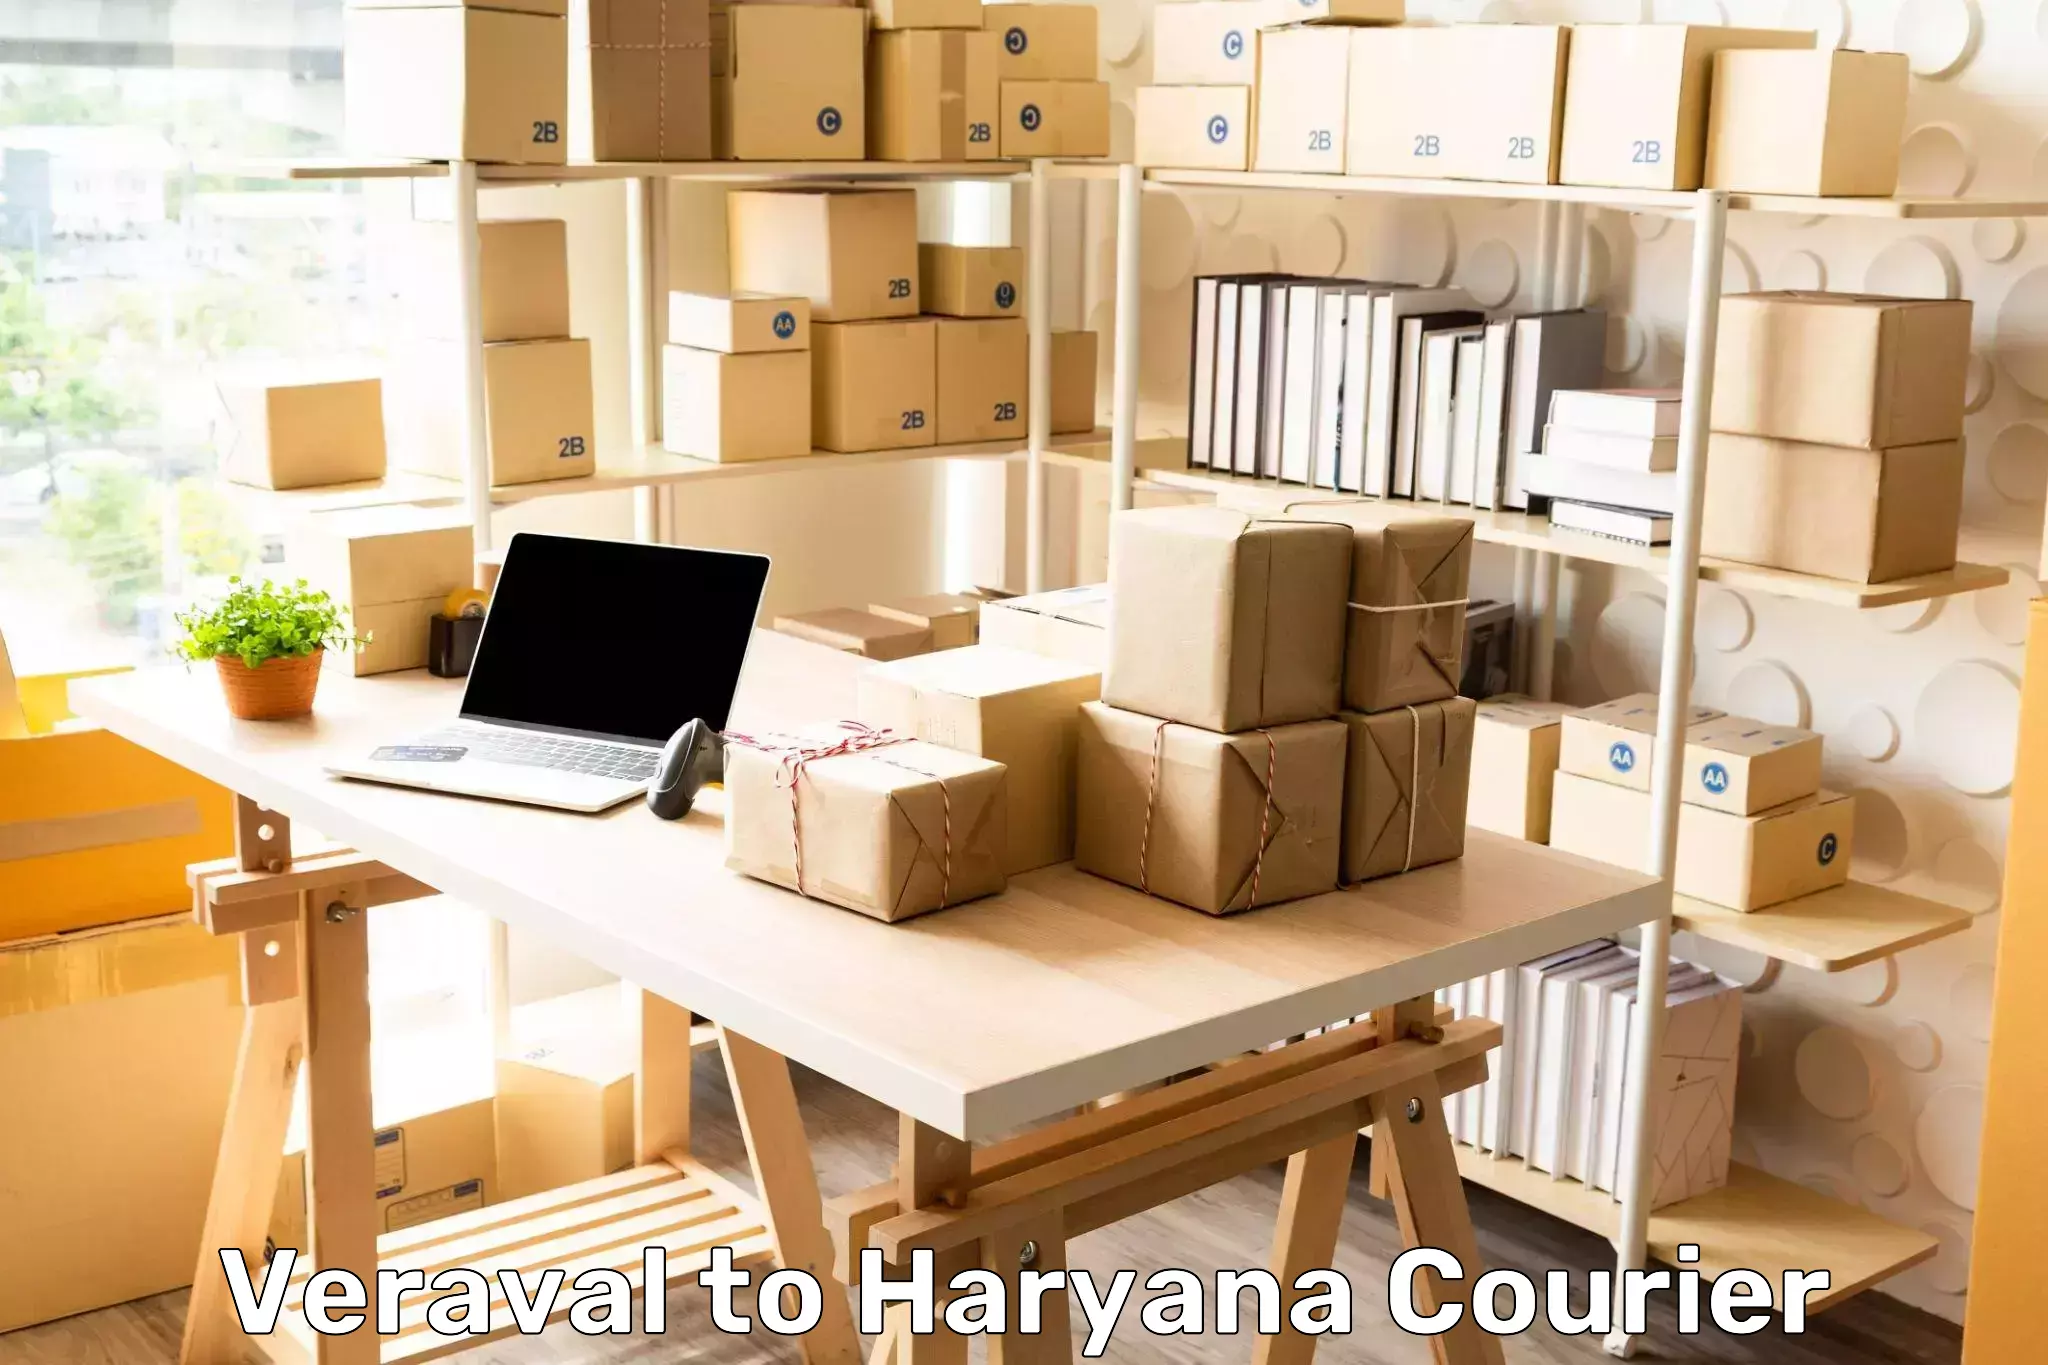 Trackable shipping service Veraval to Jhajjar